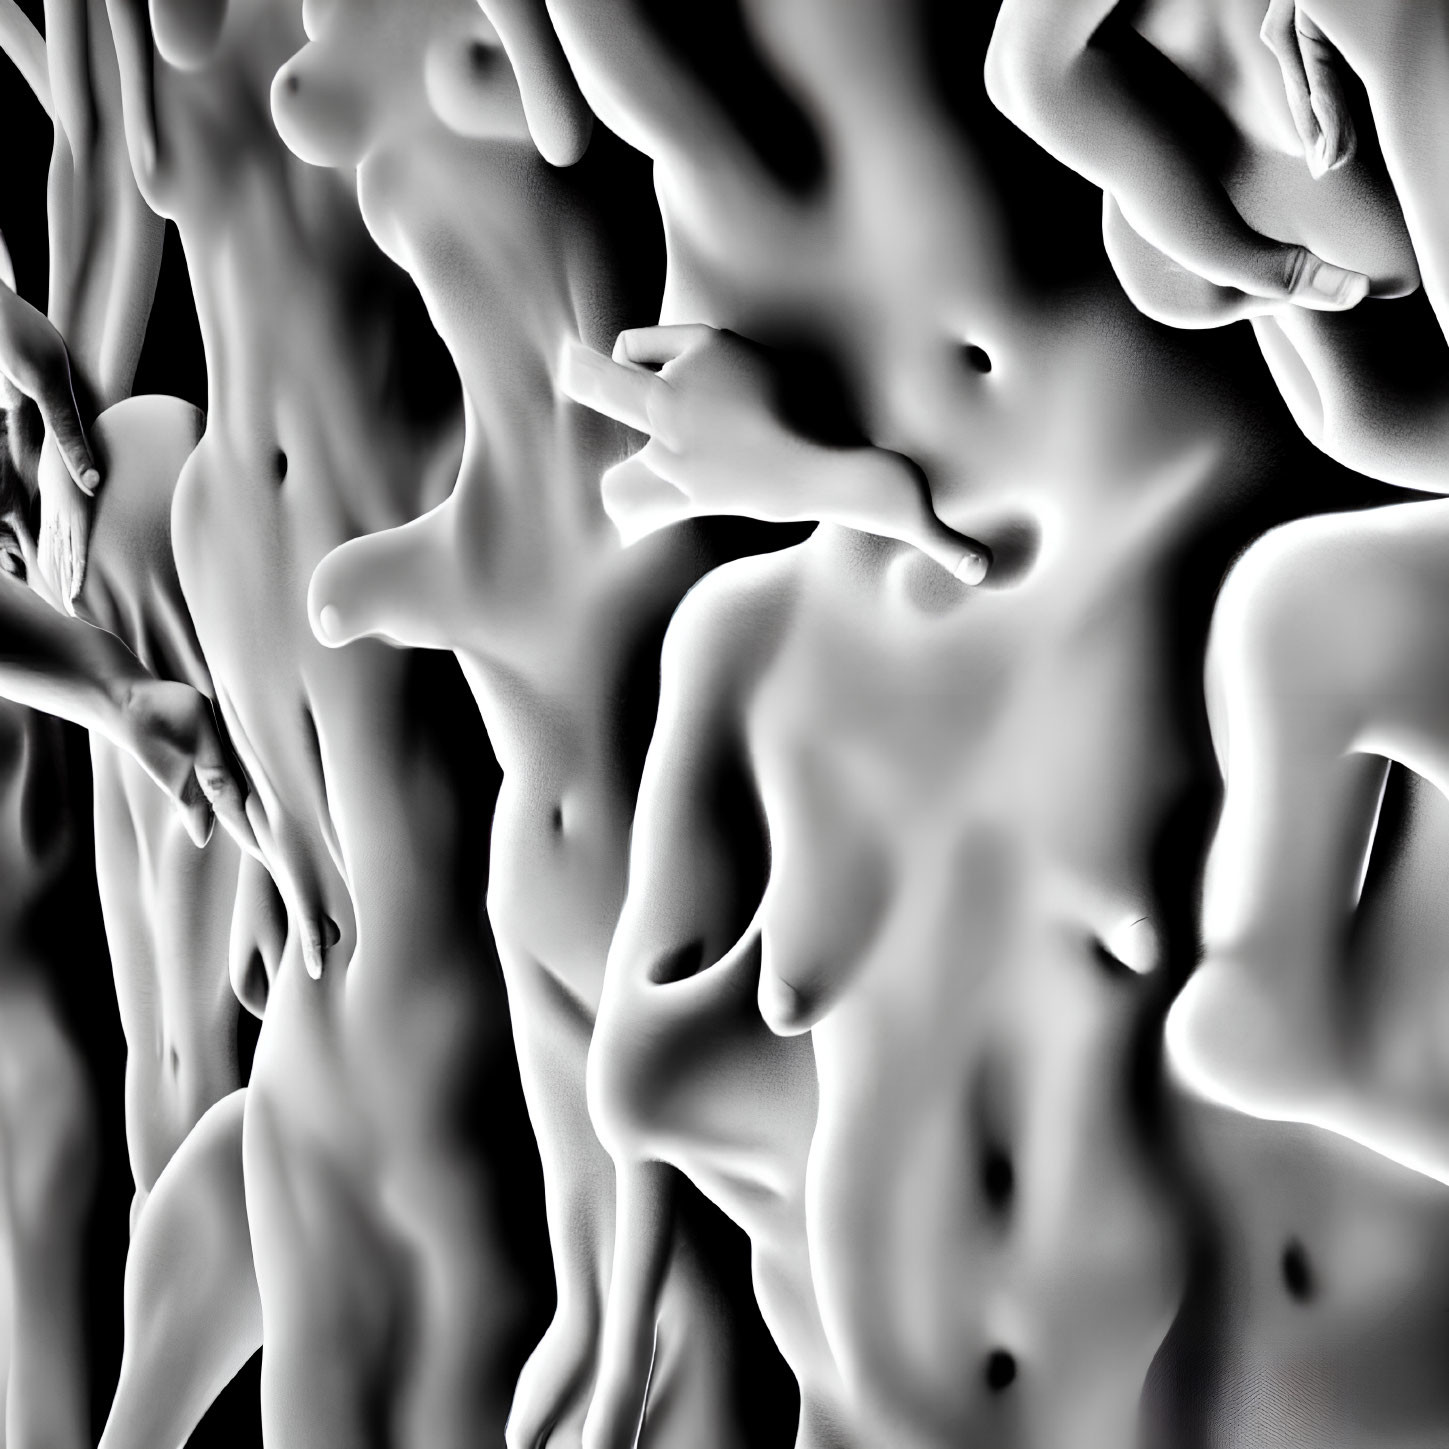 Monochrome abstract art with fluid, wavy shapes mimicking topographic landscapes.